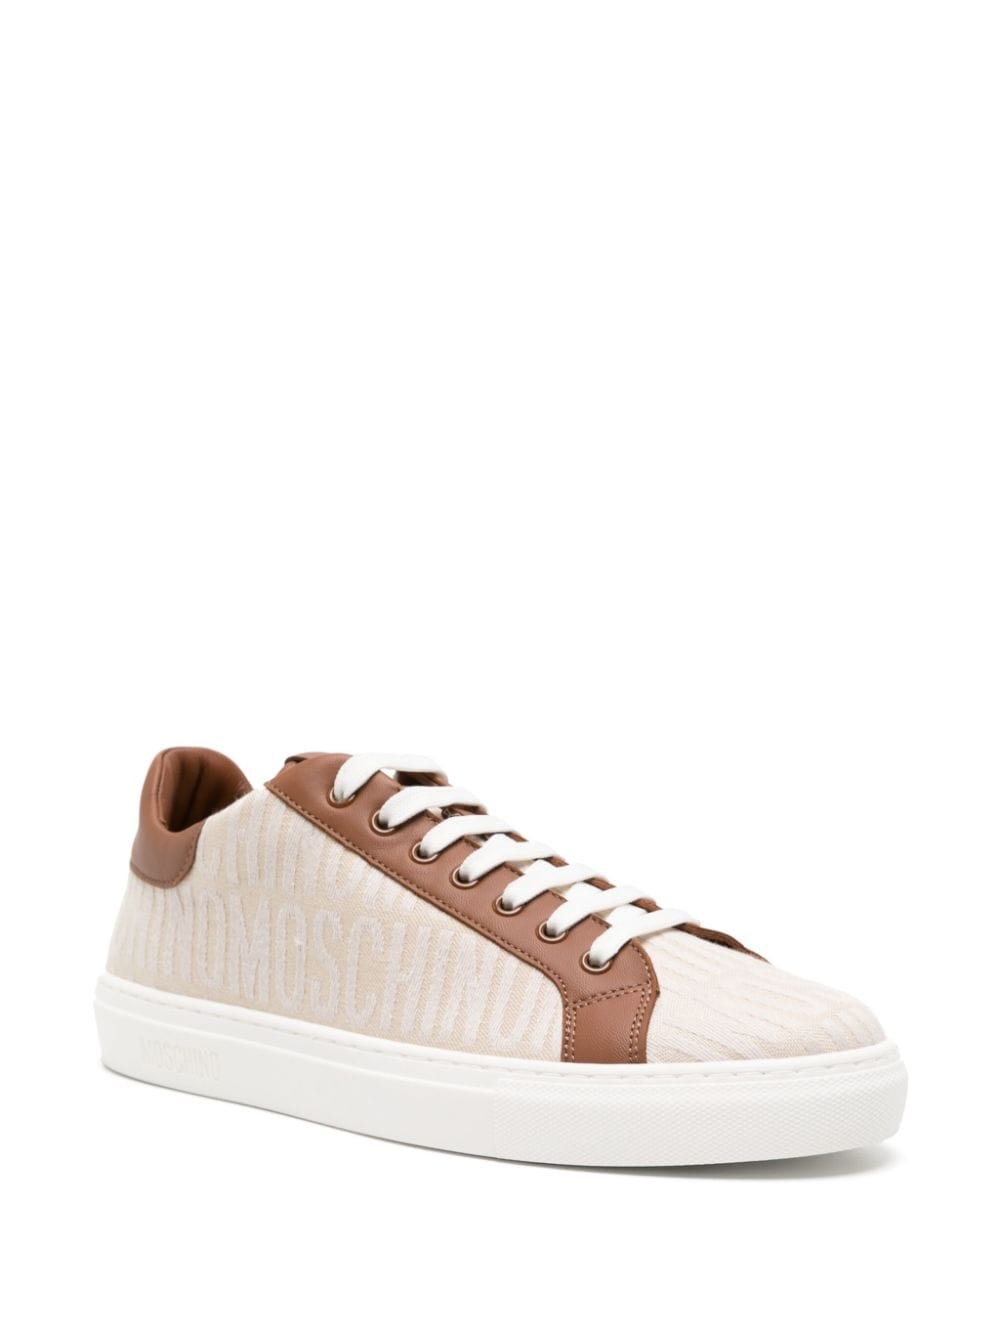 embroidered-logo panelled-leather sneakers - 2